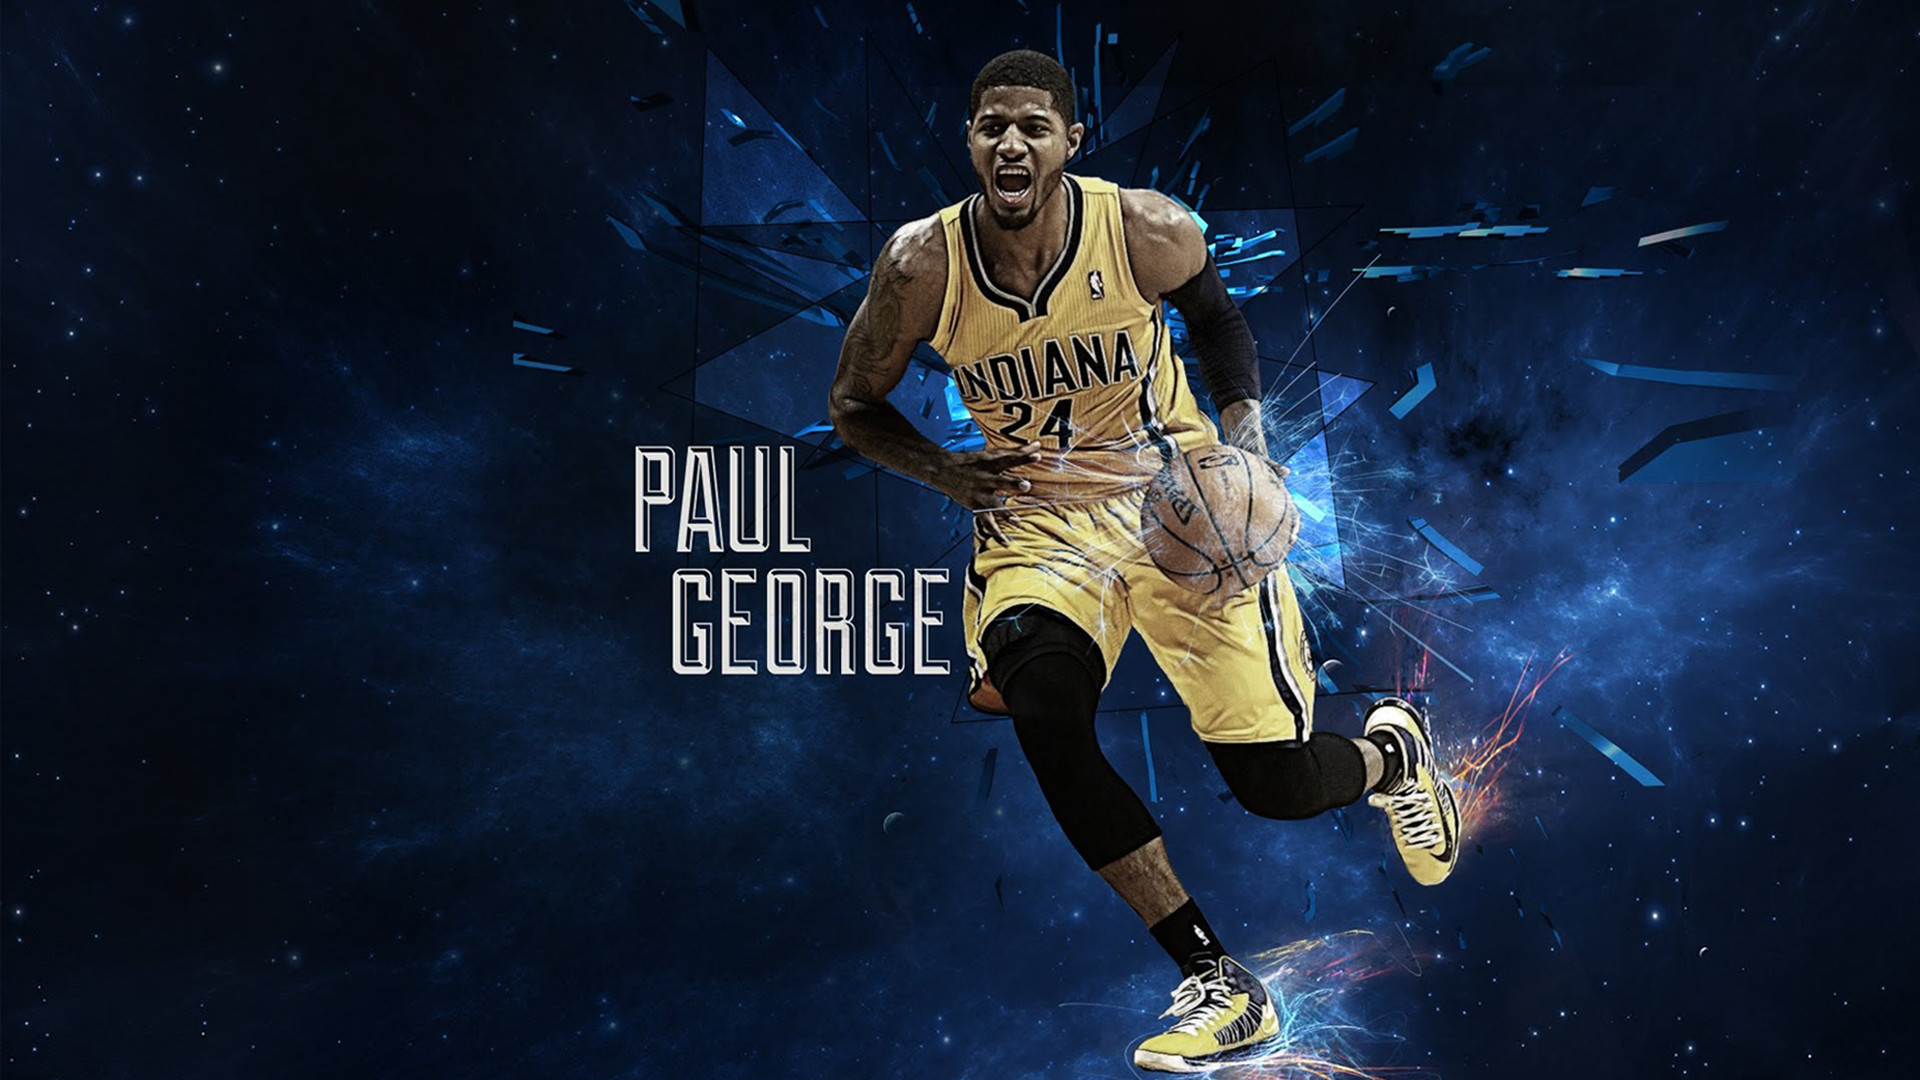 1920x1080 Paul George Indiana Pacers NBA Players HD Wallpaper Free.